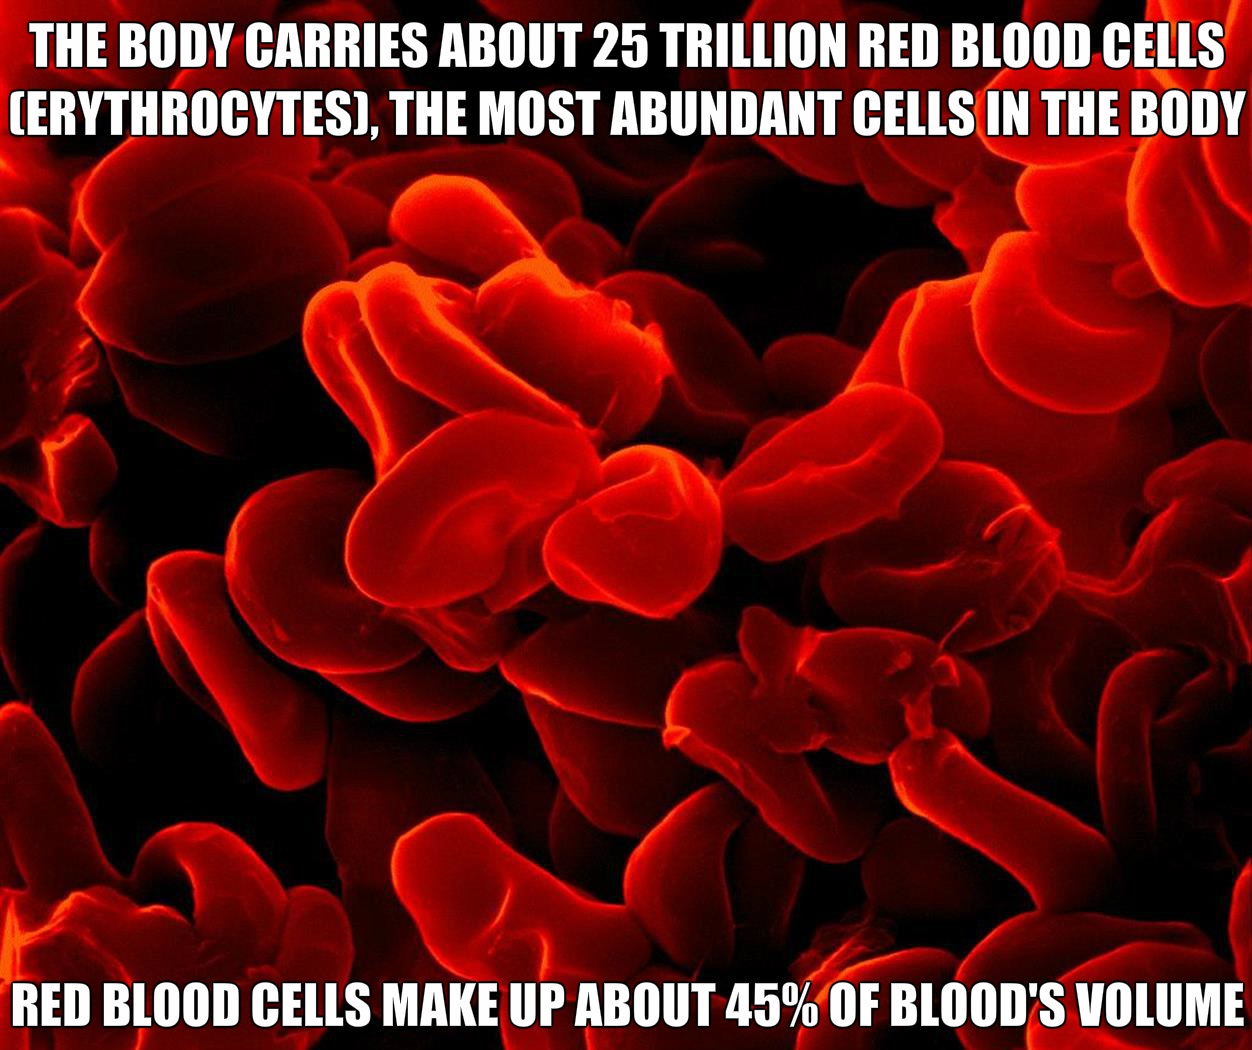 20 Facts About The Human Body